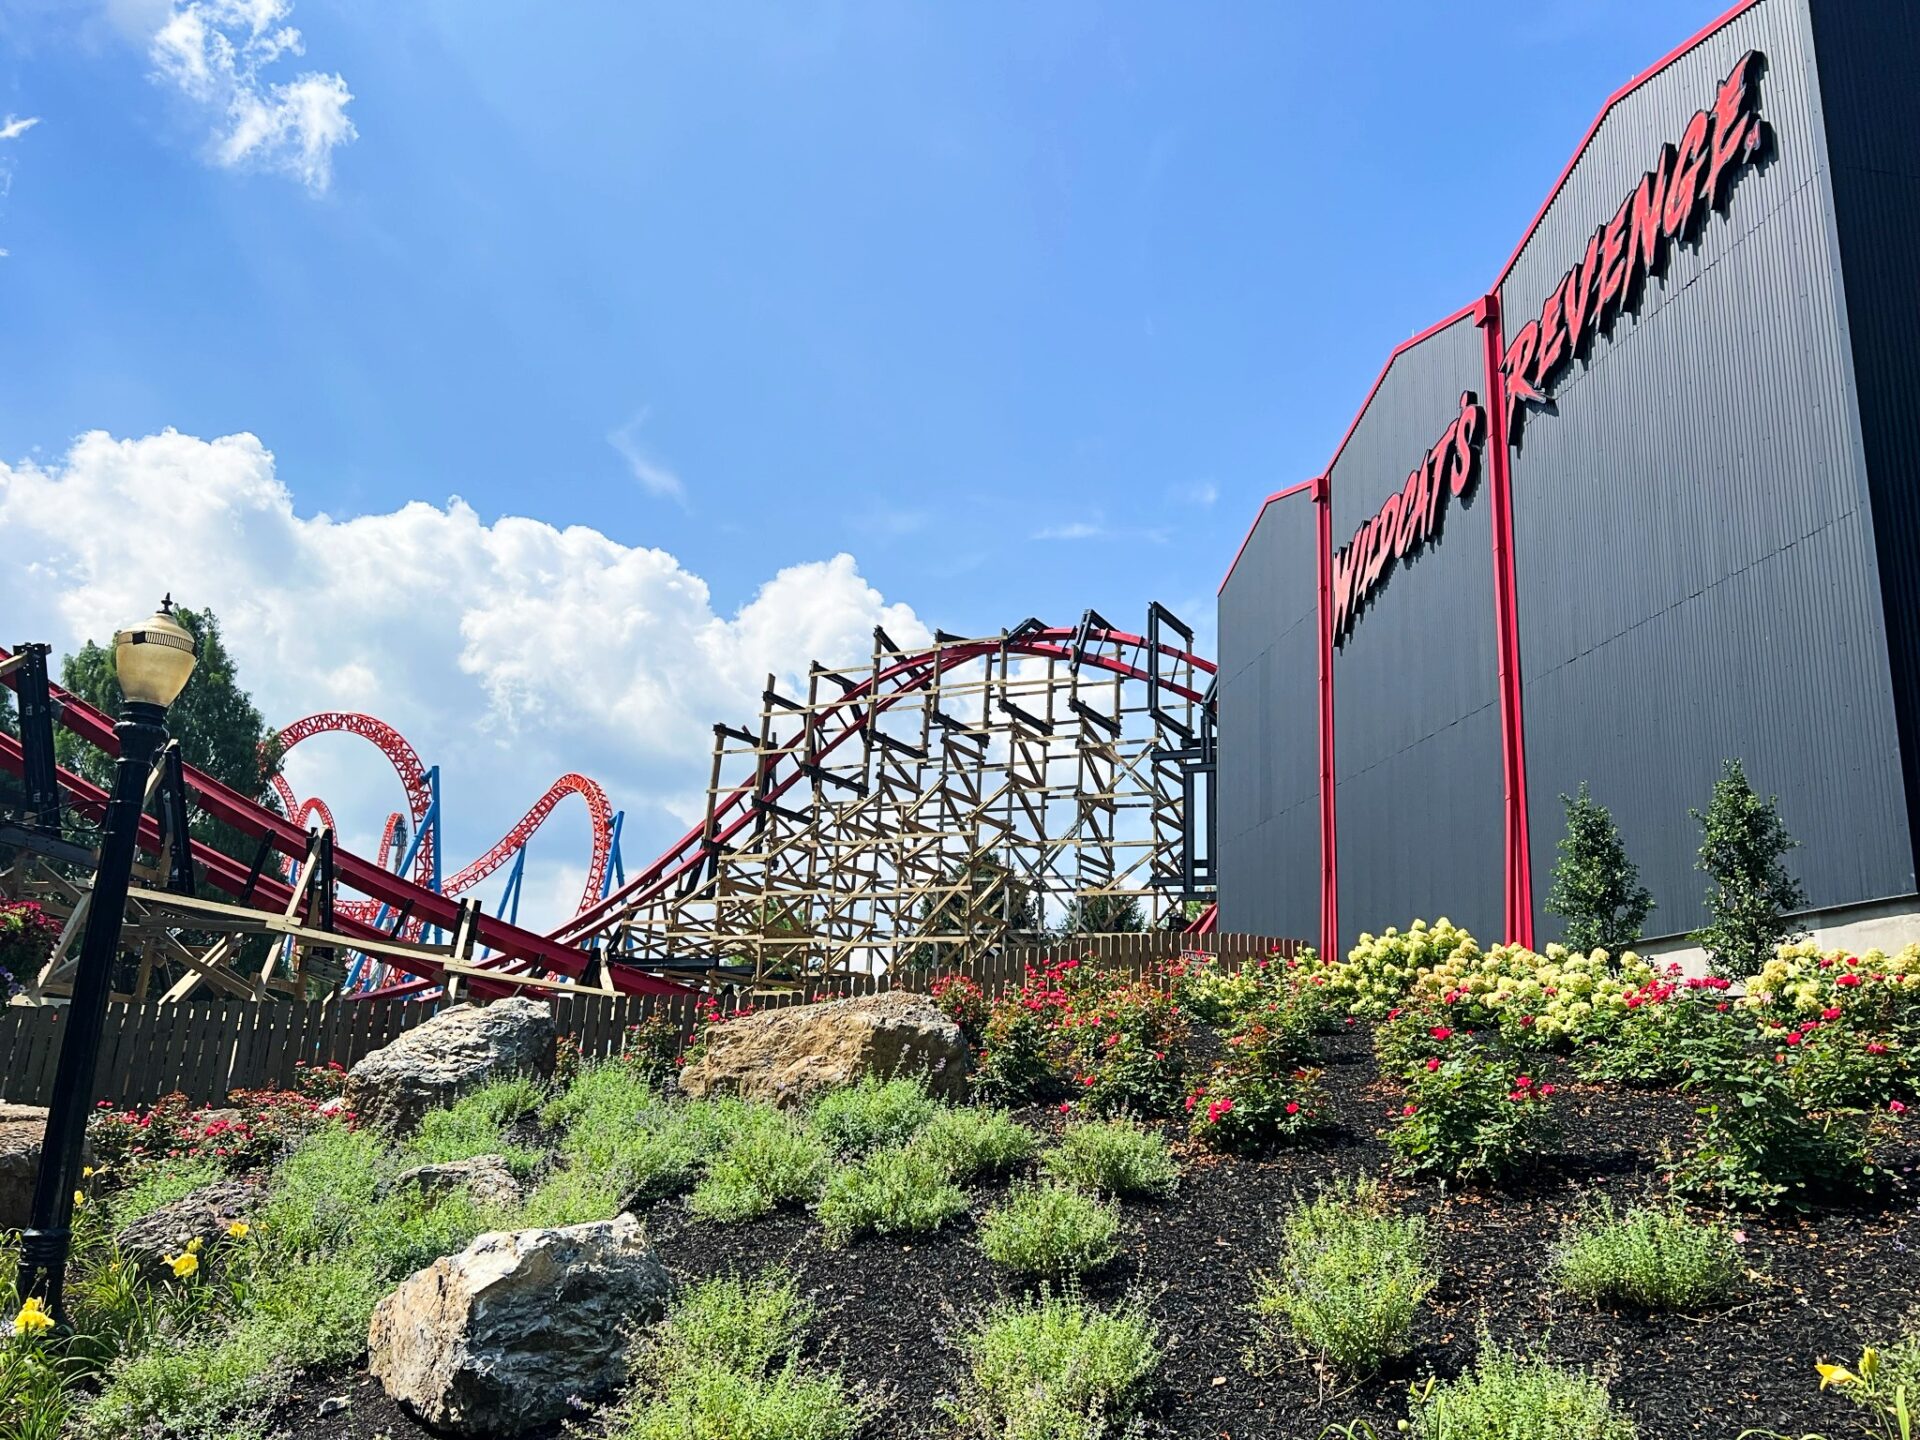 Tips for Visiting Hersheypark, PA (with a review of the Hersheypark campground!)